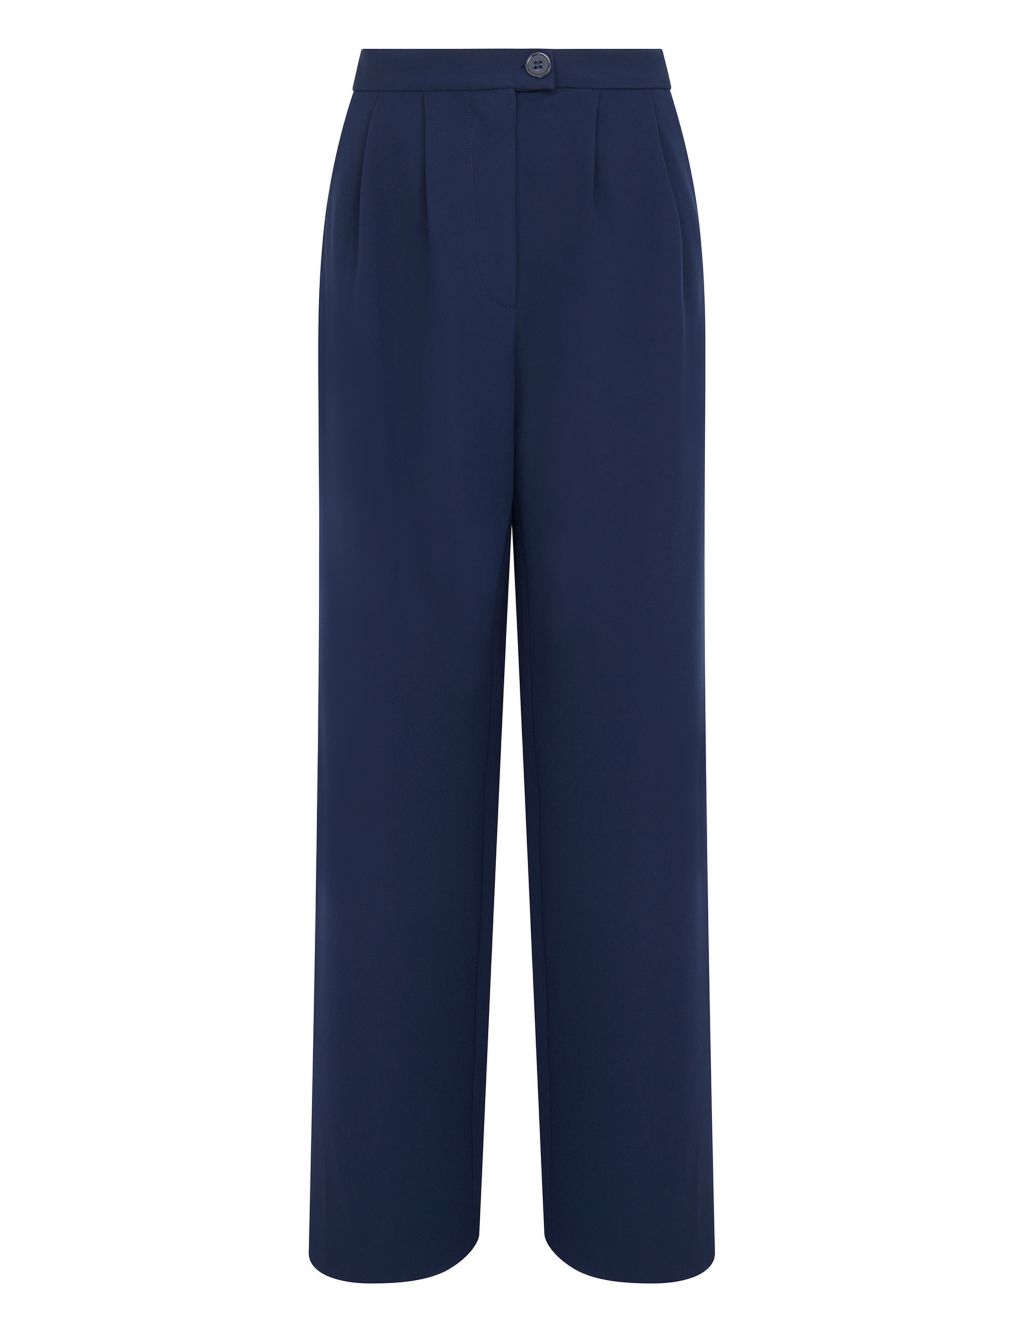 High Waisted Wide Leg Trousers | Finery London | M&S